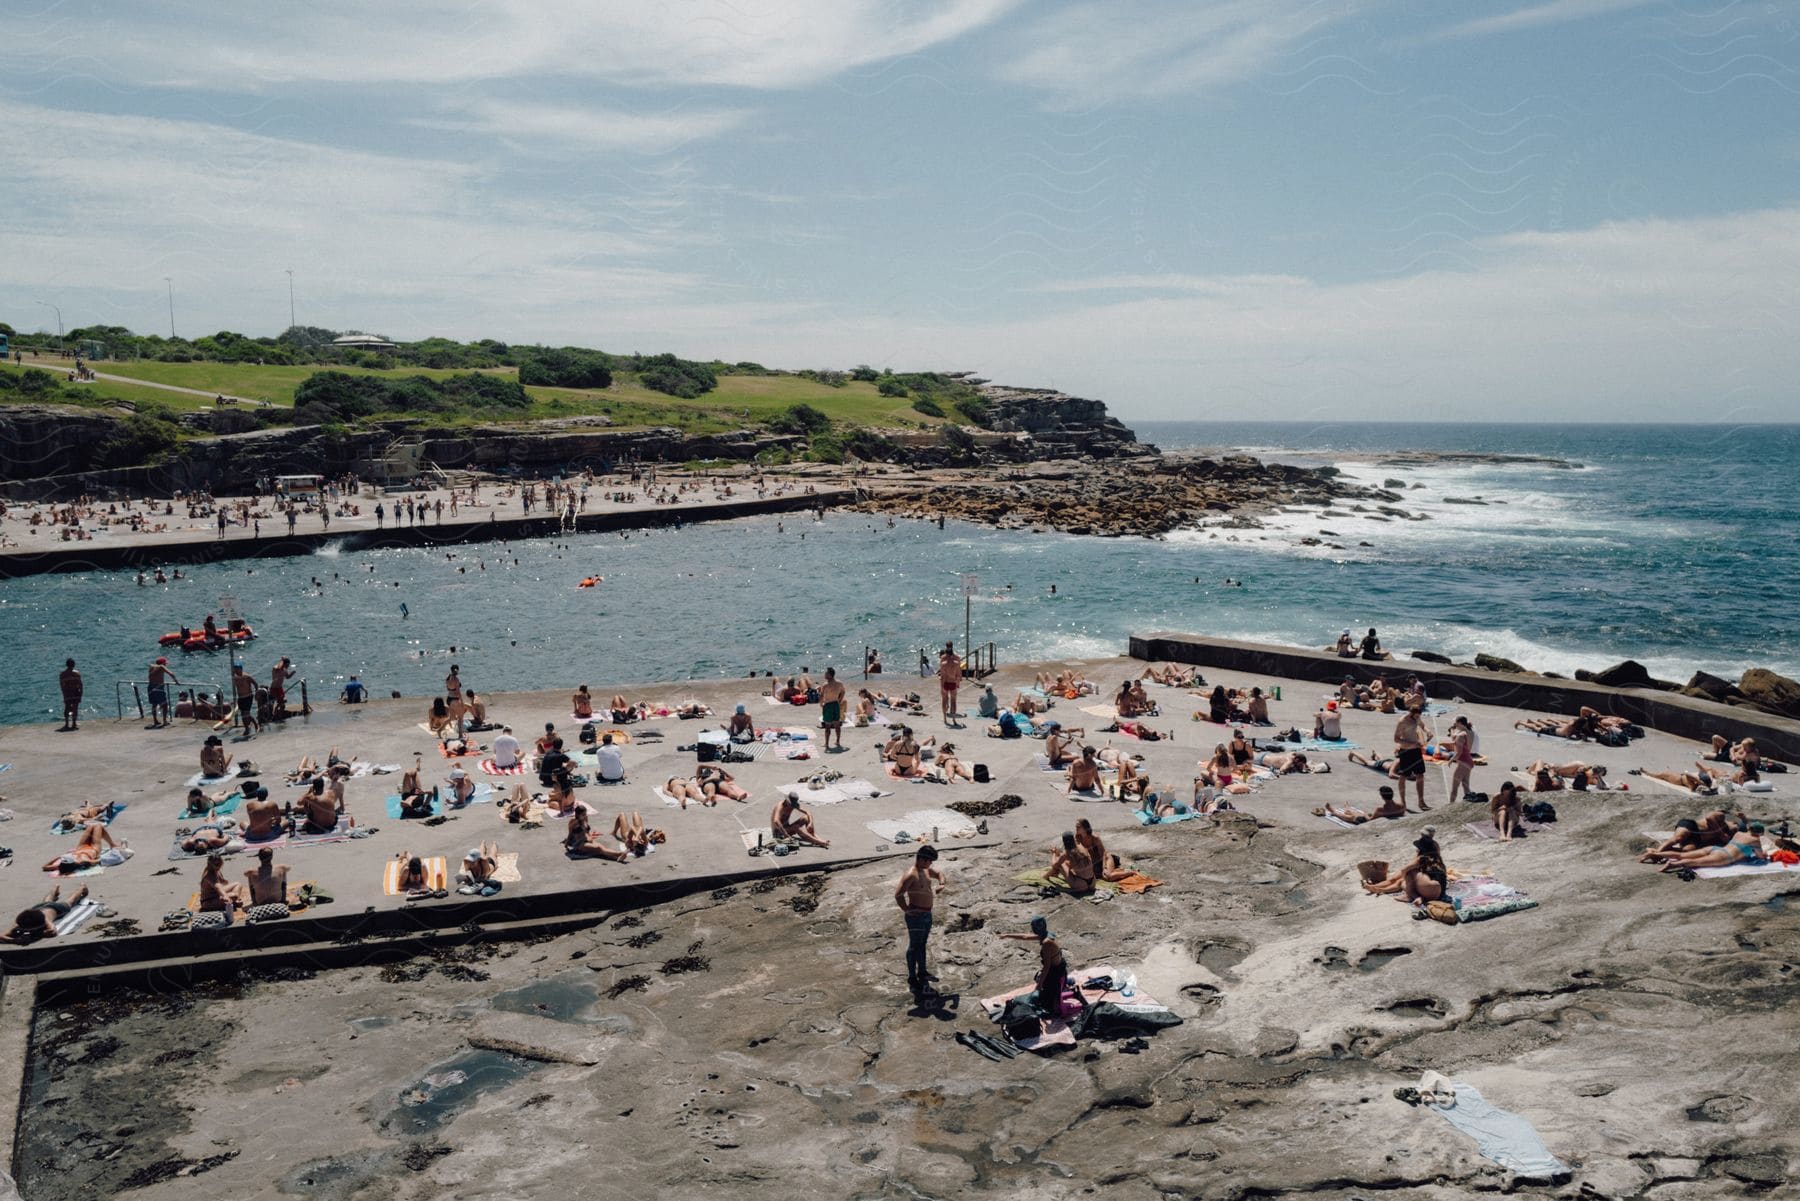 A busy scene on a rocky beach, with people sunbathing and swimming during the sunny day.